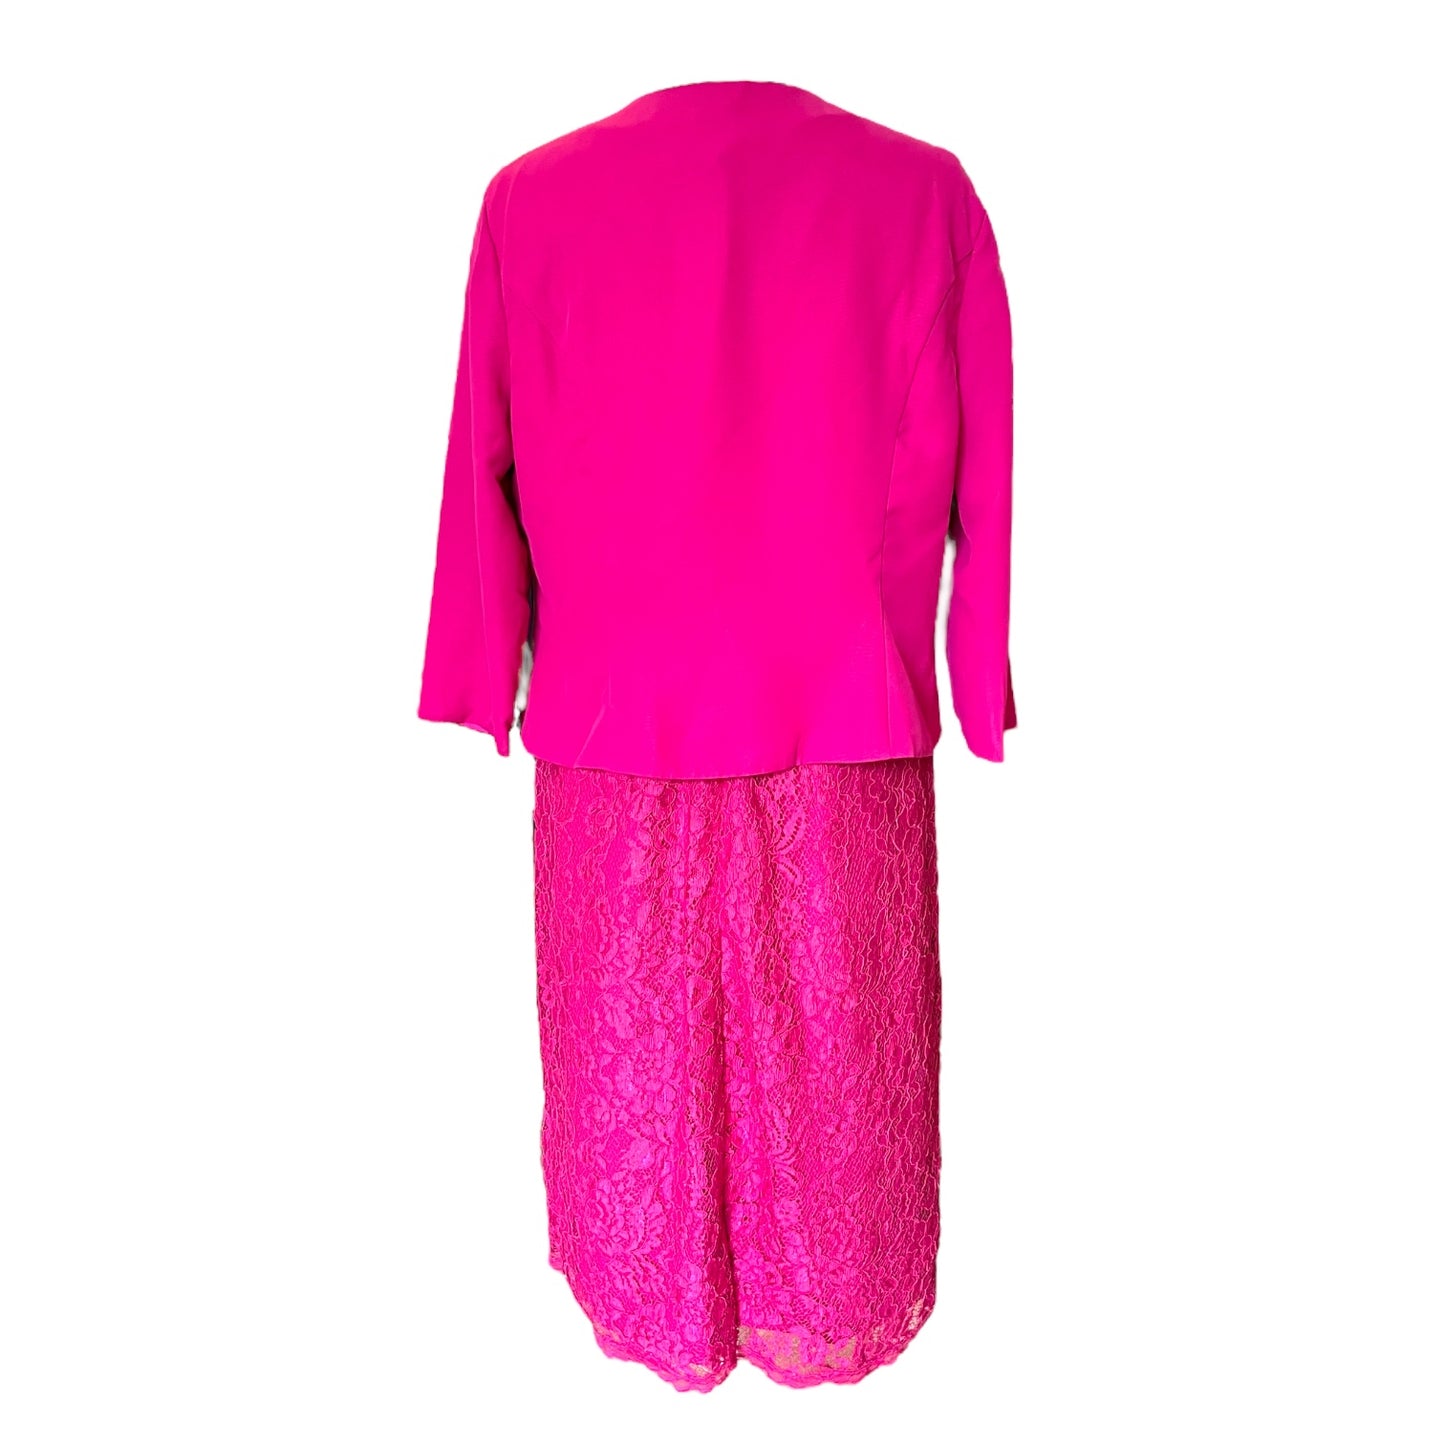 JJ's House Pink Lace Dress and Jacket - 14 - NEW